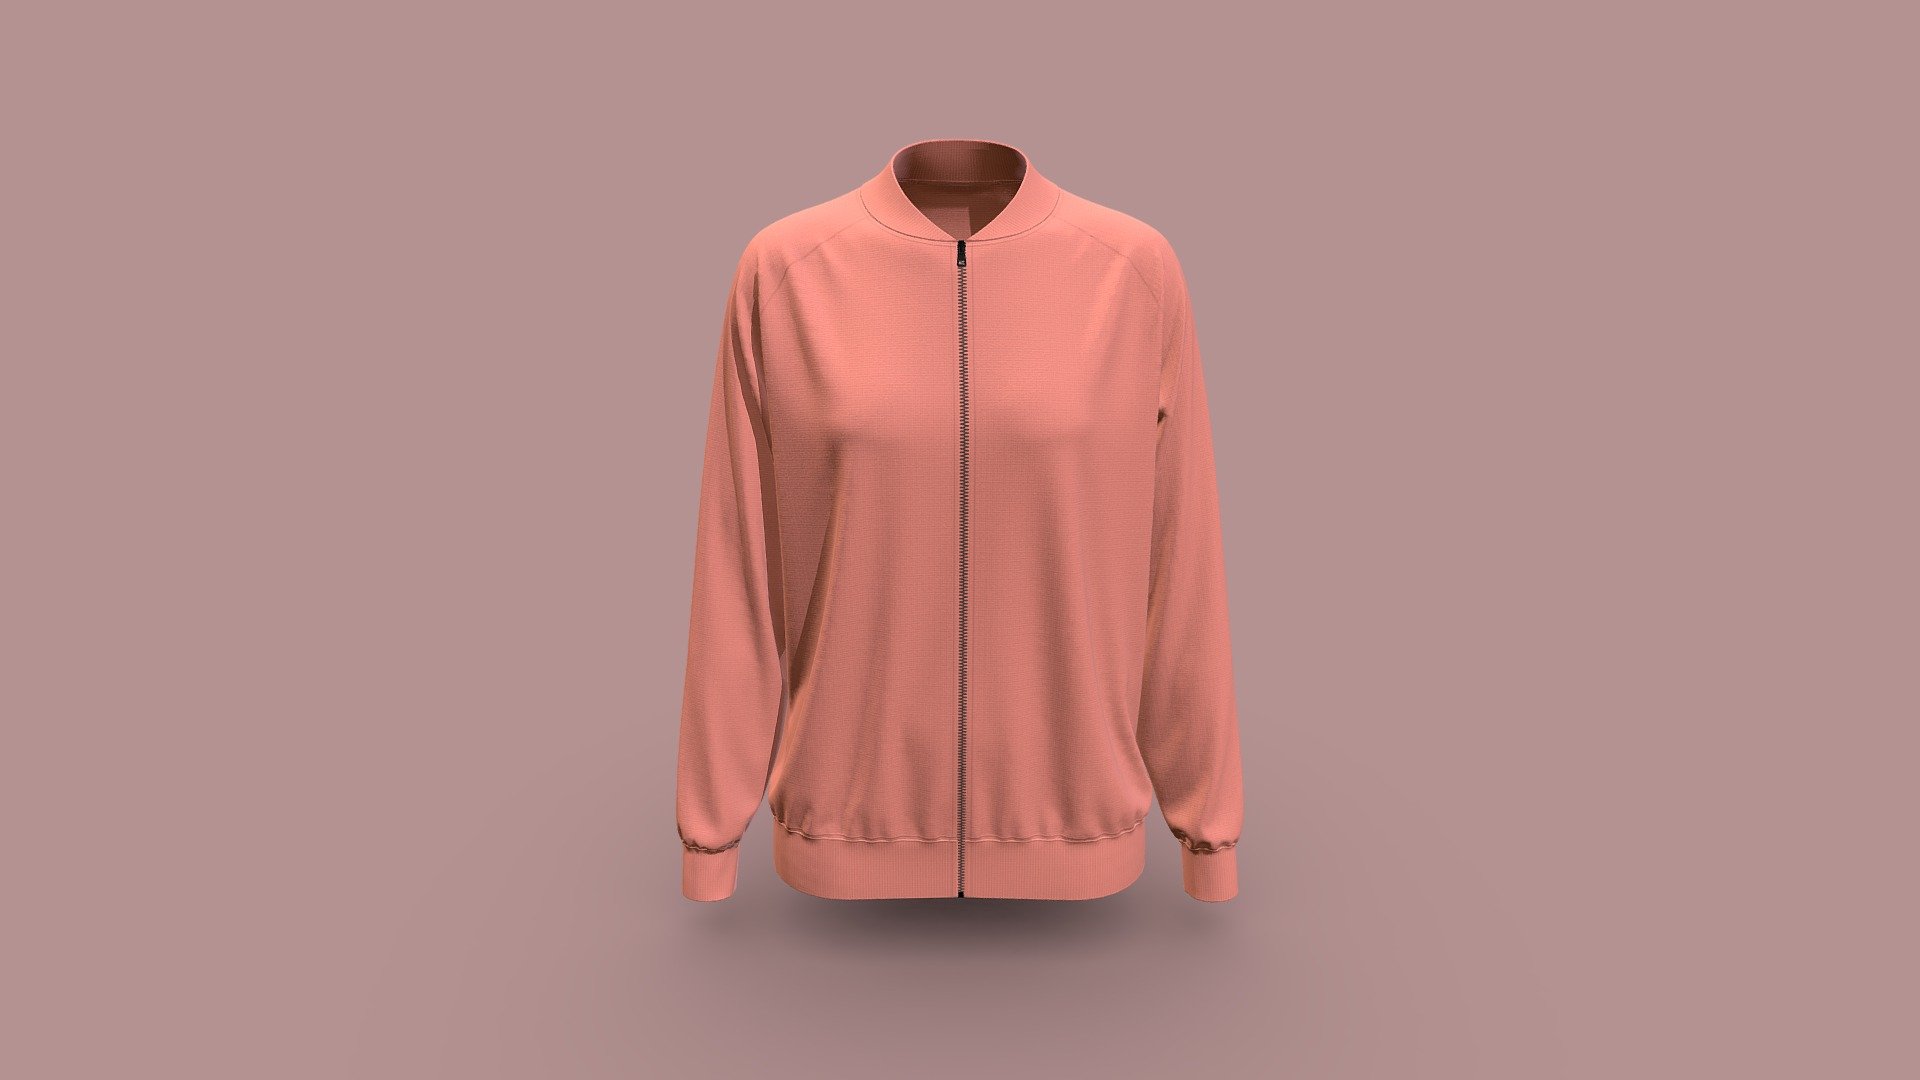 Cloth Title = Knit Jacket for Women 

SKU = DG100210 

Category = Women 

Product Type = Jacket 

Cloth Length = Long 

Body Fit = Loose Fit 

Occasion = Outerwear 

Sleeve Style = Long Sleeve 


Our Services:

3D Apparel Design.

OBJ,FBX,GLTF Making with High/Low Poly.

Fabric Digitalization.

Mockup making.

3D Teck Pack.

Pattern Making.

2D Illustration.

Cloth Animation and 360 Spin Video.


Contact us:- 

Email: info@digitalfashionwear.com 

Website: https://digitalfashionwear.com 


We designed all the types of cloth specially focused on product visualization, e-commerce, fitting, and production. 

We will design: 

T-shirts 

Polo shirts 

Hoodies 

Sweatshirt 

Jackets 

Shirts 

TankTops 

Trousers 

Bras 

Underwear 

Blazer 

Aprons 

Leggings 

and All Fashion items. 





Our goal is to make sure what we provide you, meets your demand 3d model